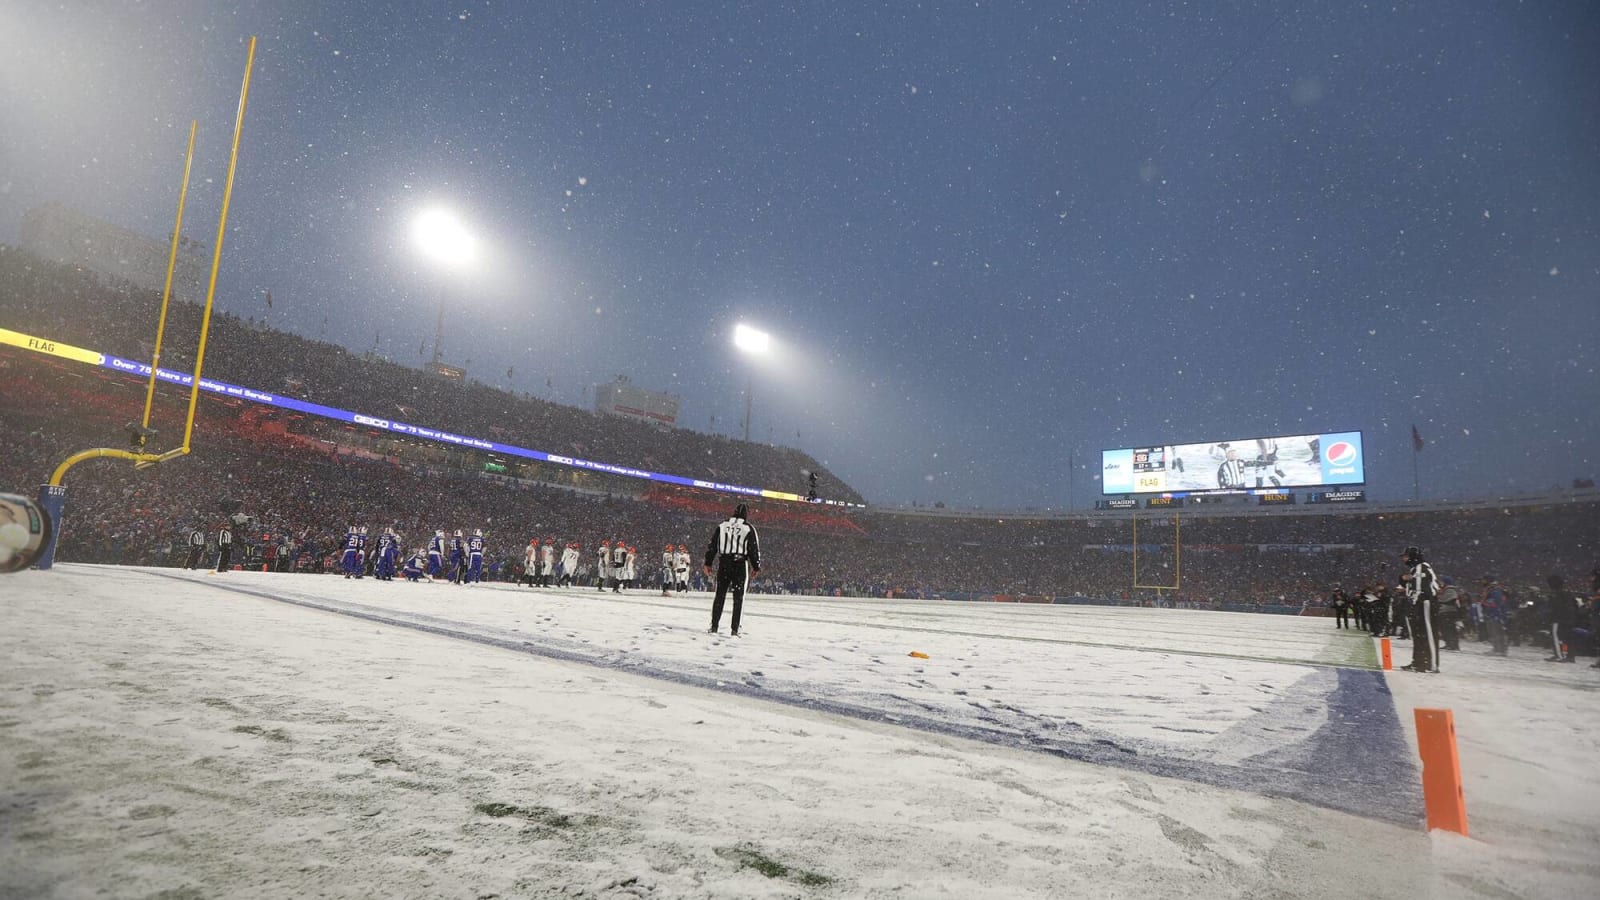 Travel ban prevents Bills snow shovelers from reporting to stadium